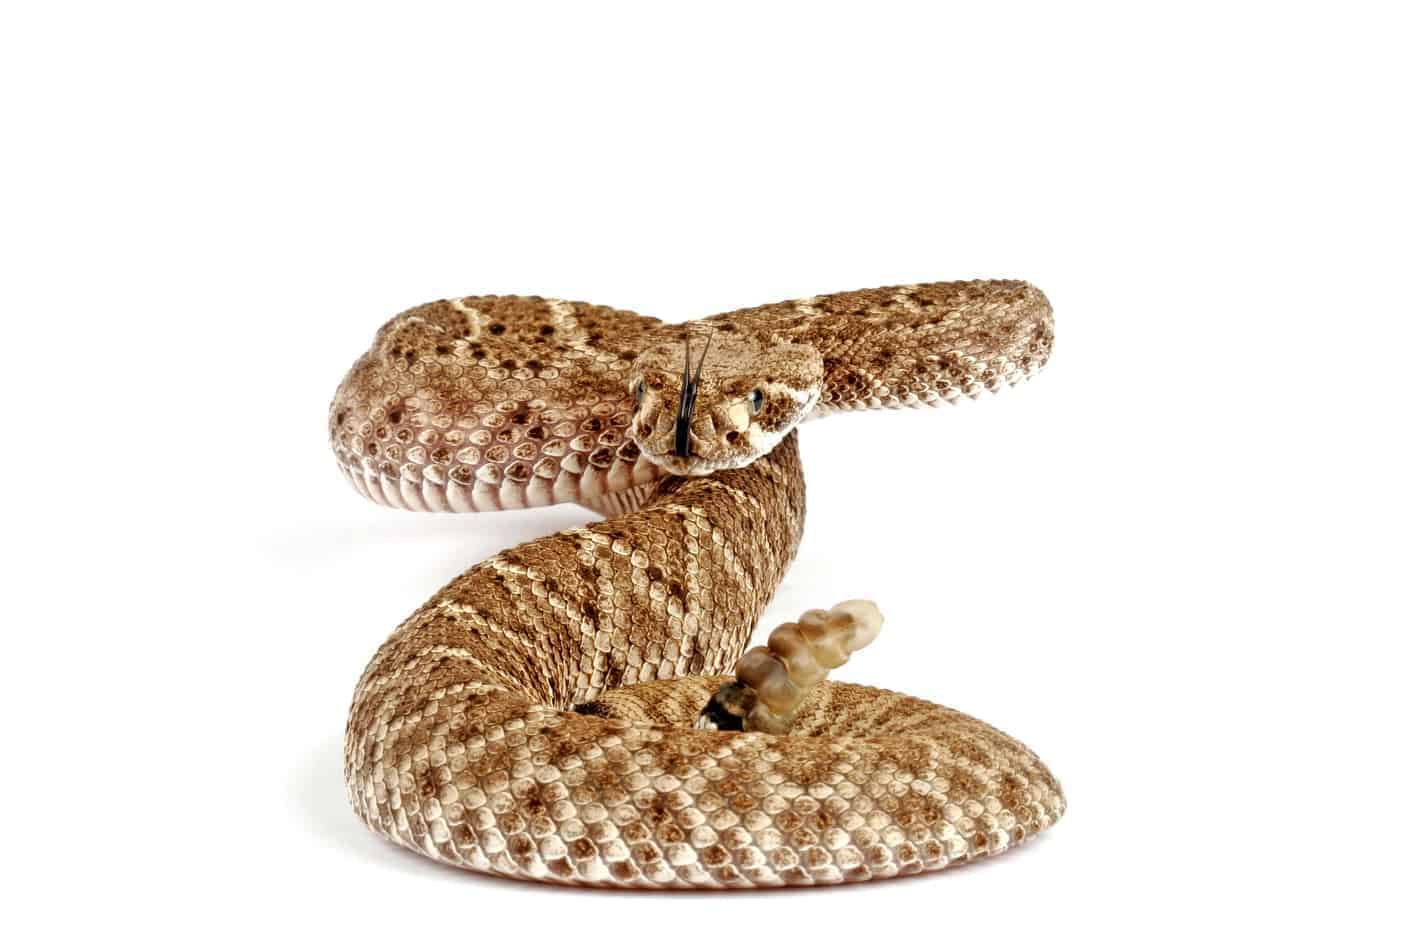 27 fascinating facts about rattlesnakes 1 27 Fascinating Facts About Rattlesnakes (With Pictures)